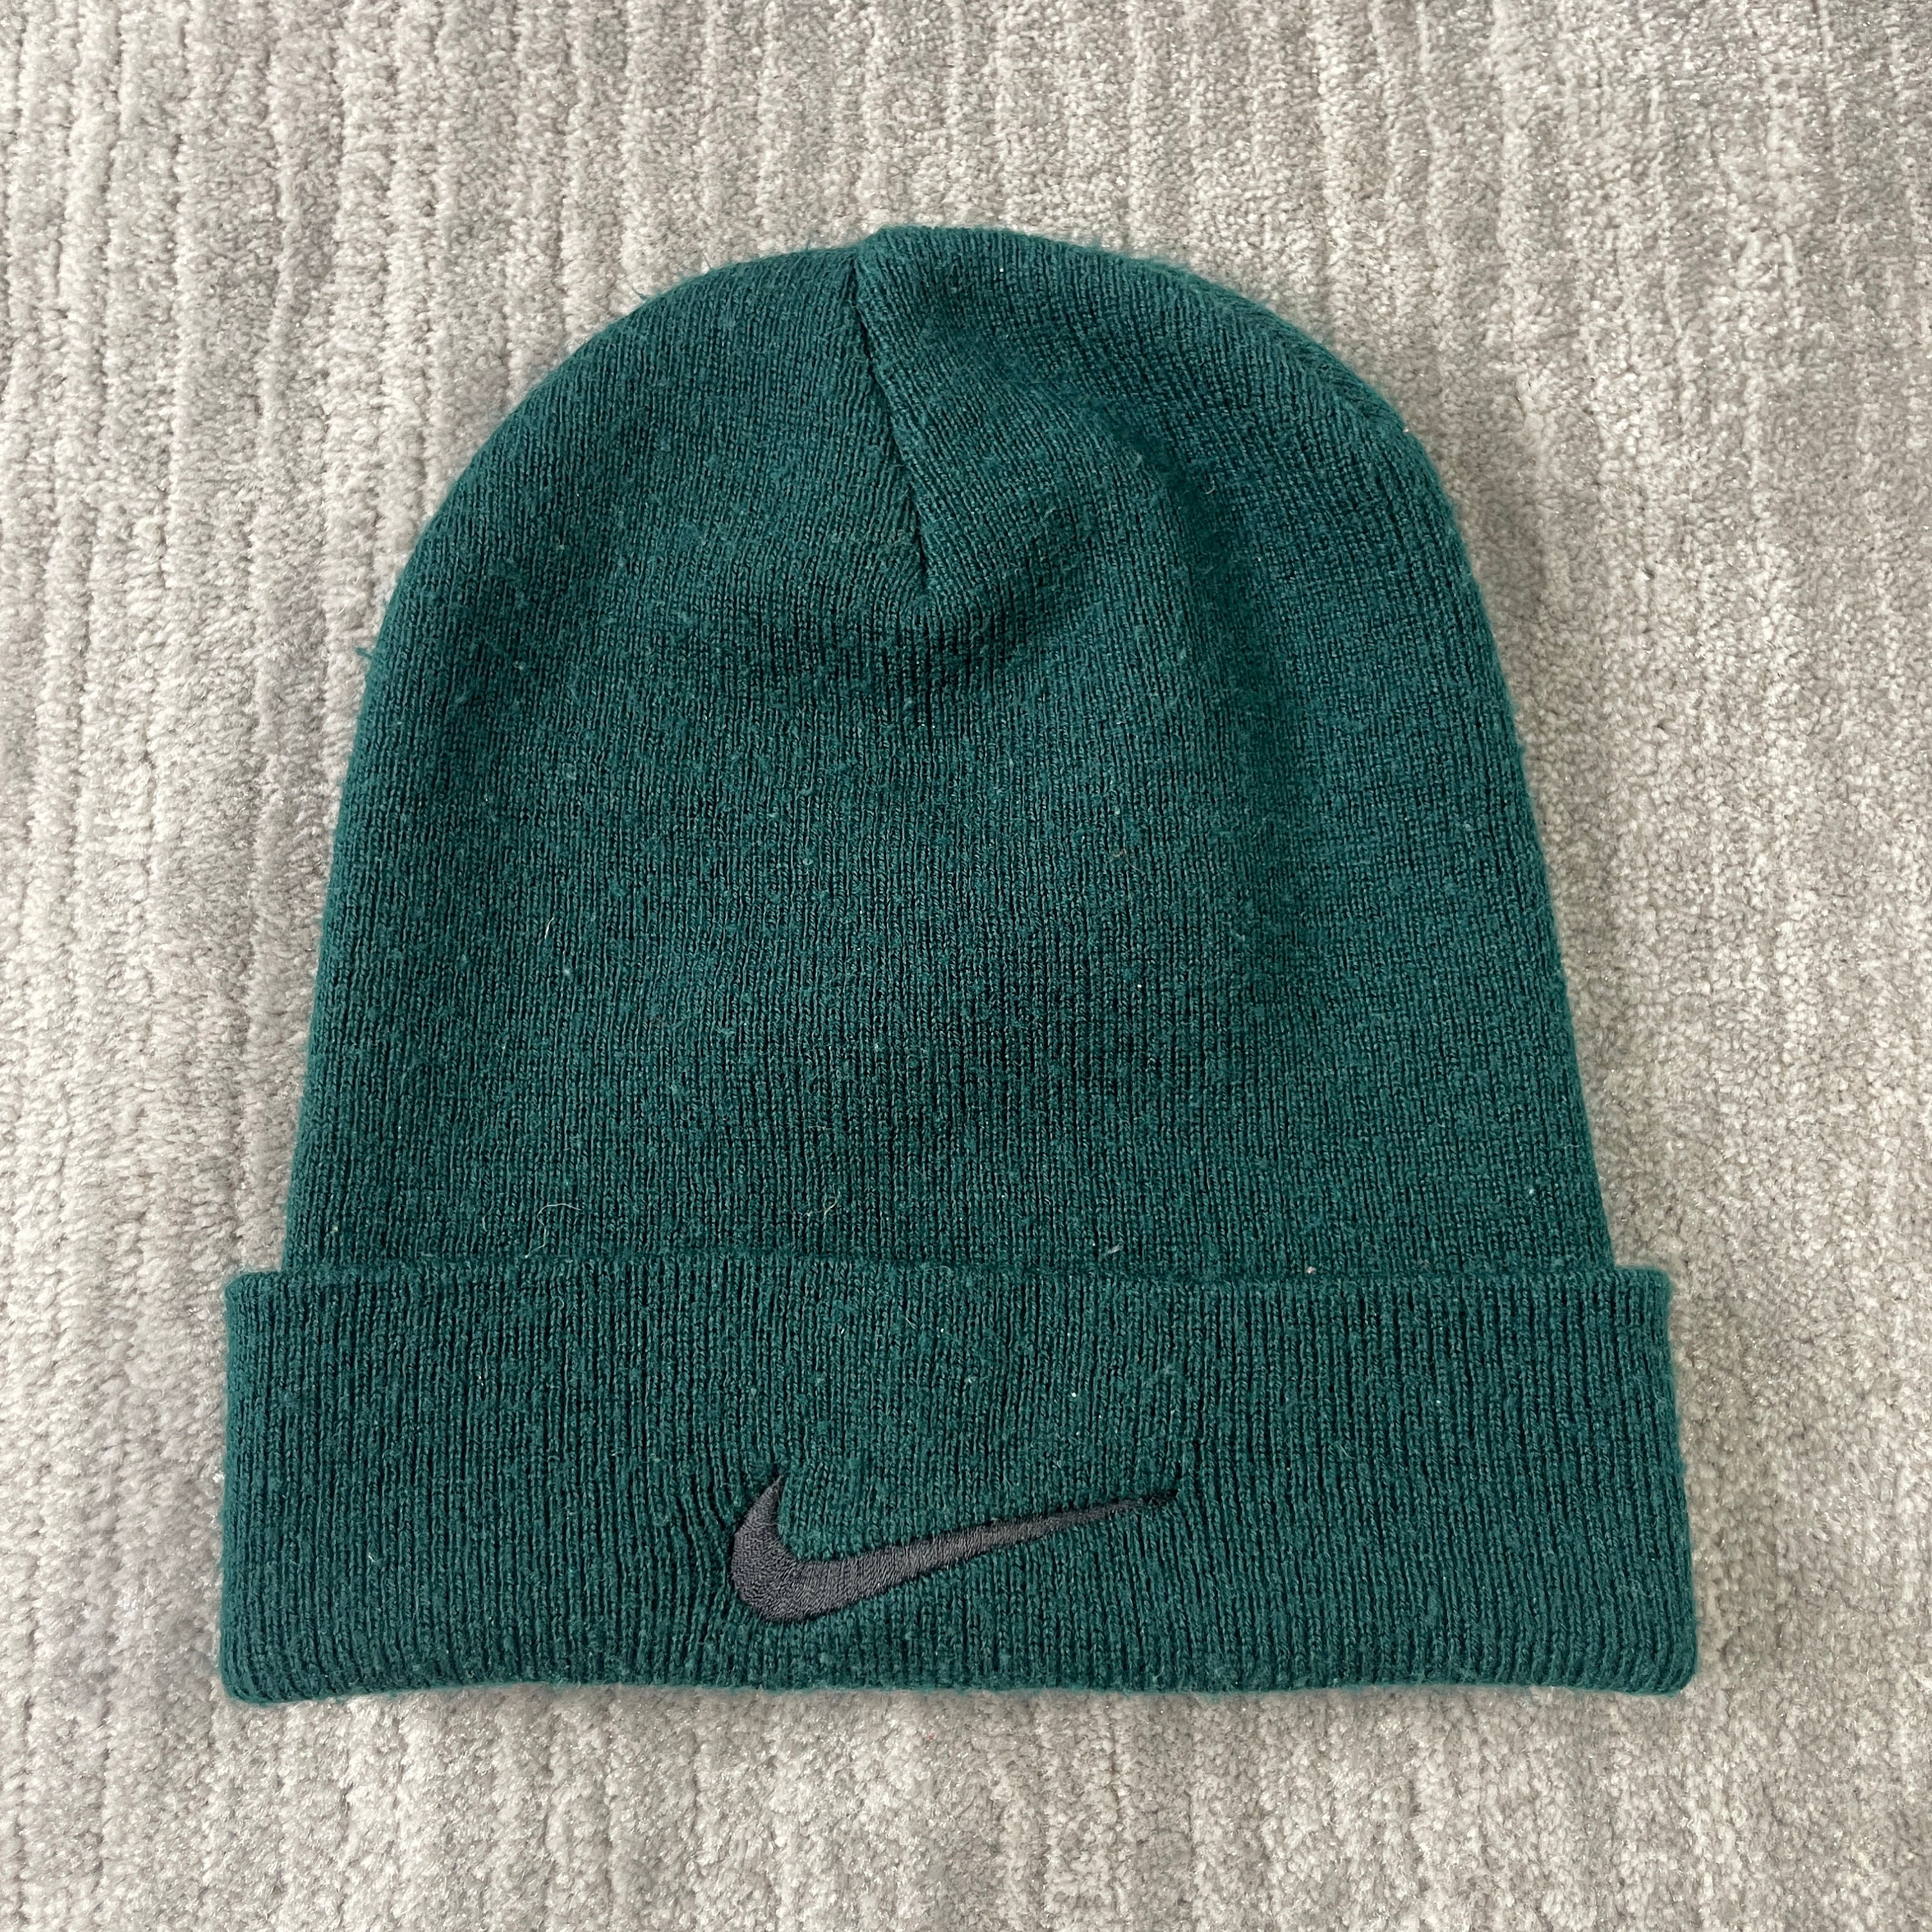 Vintage 90s Nike Sportswear Check Embroidered Stitched Logo Winter